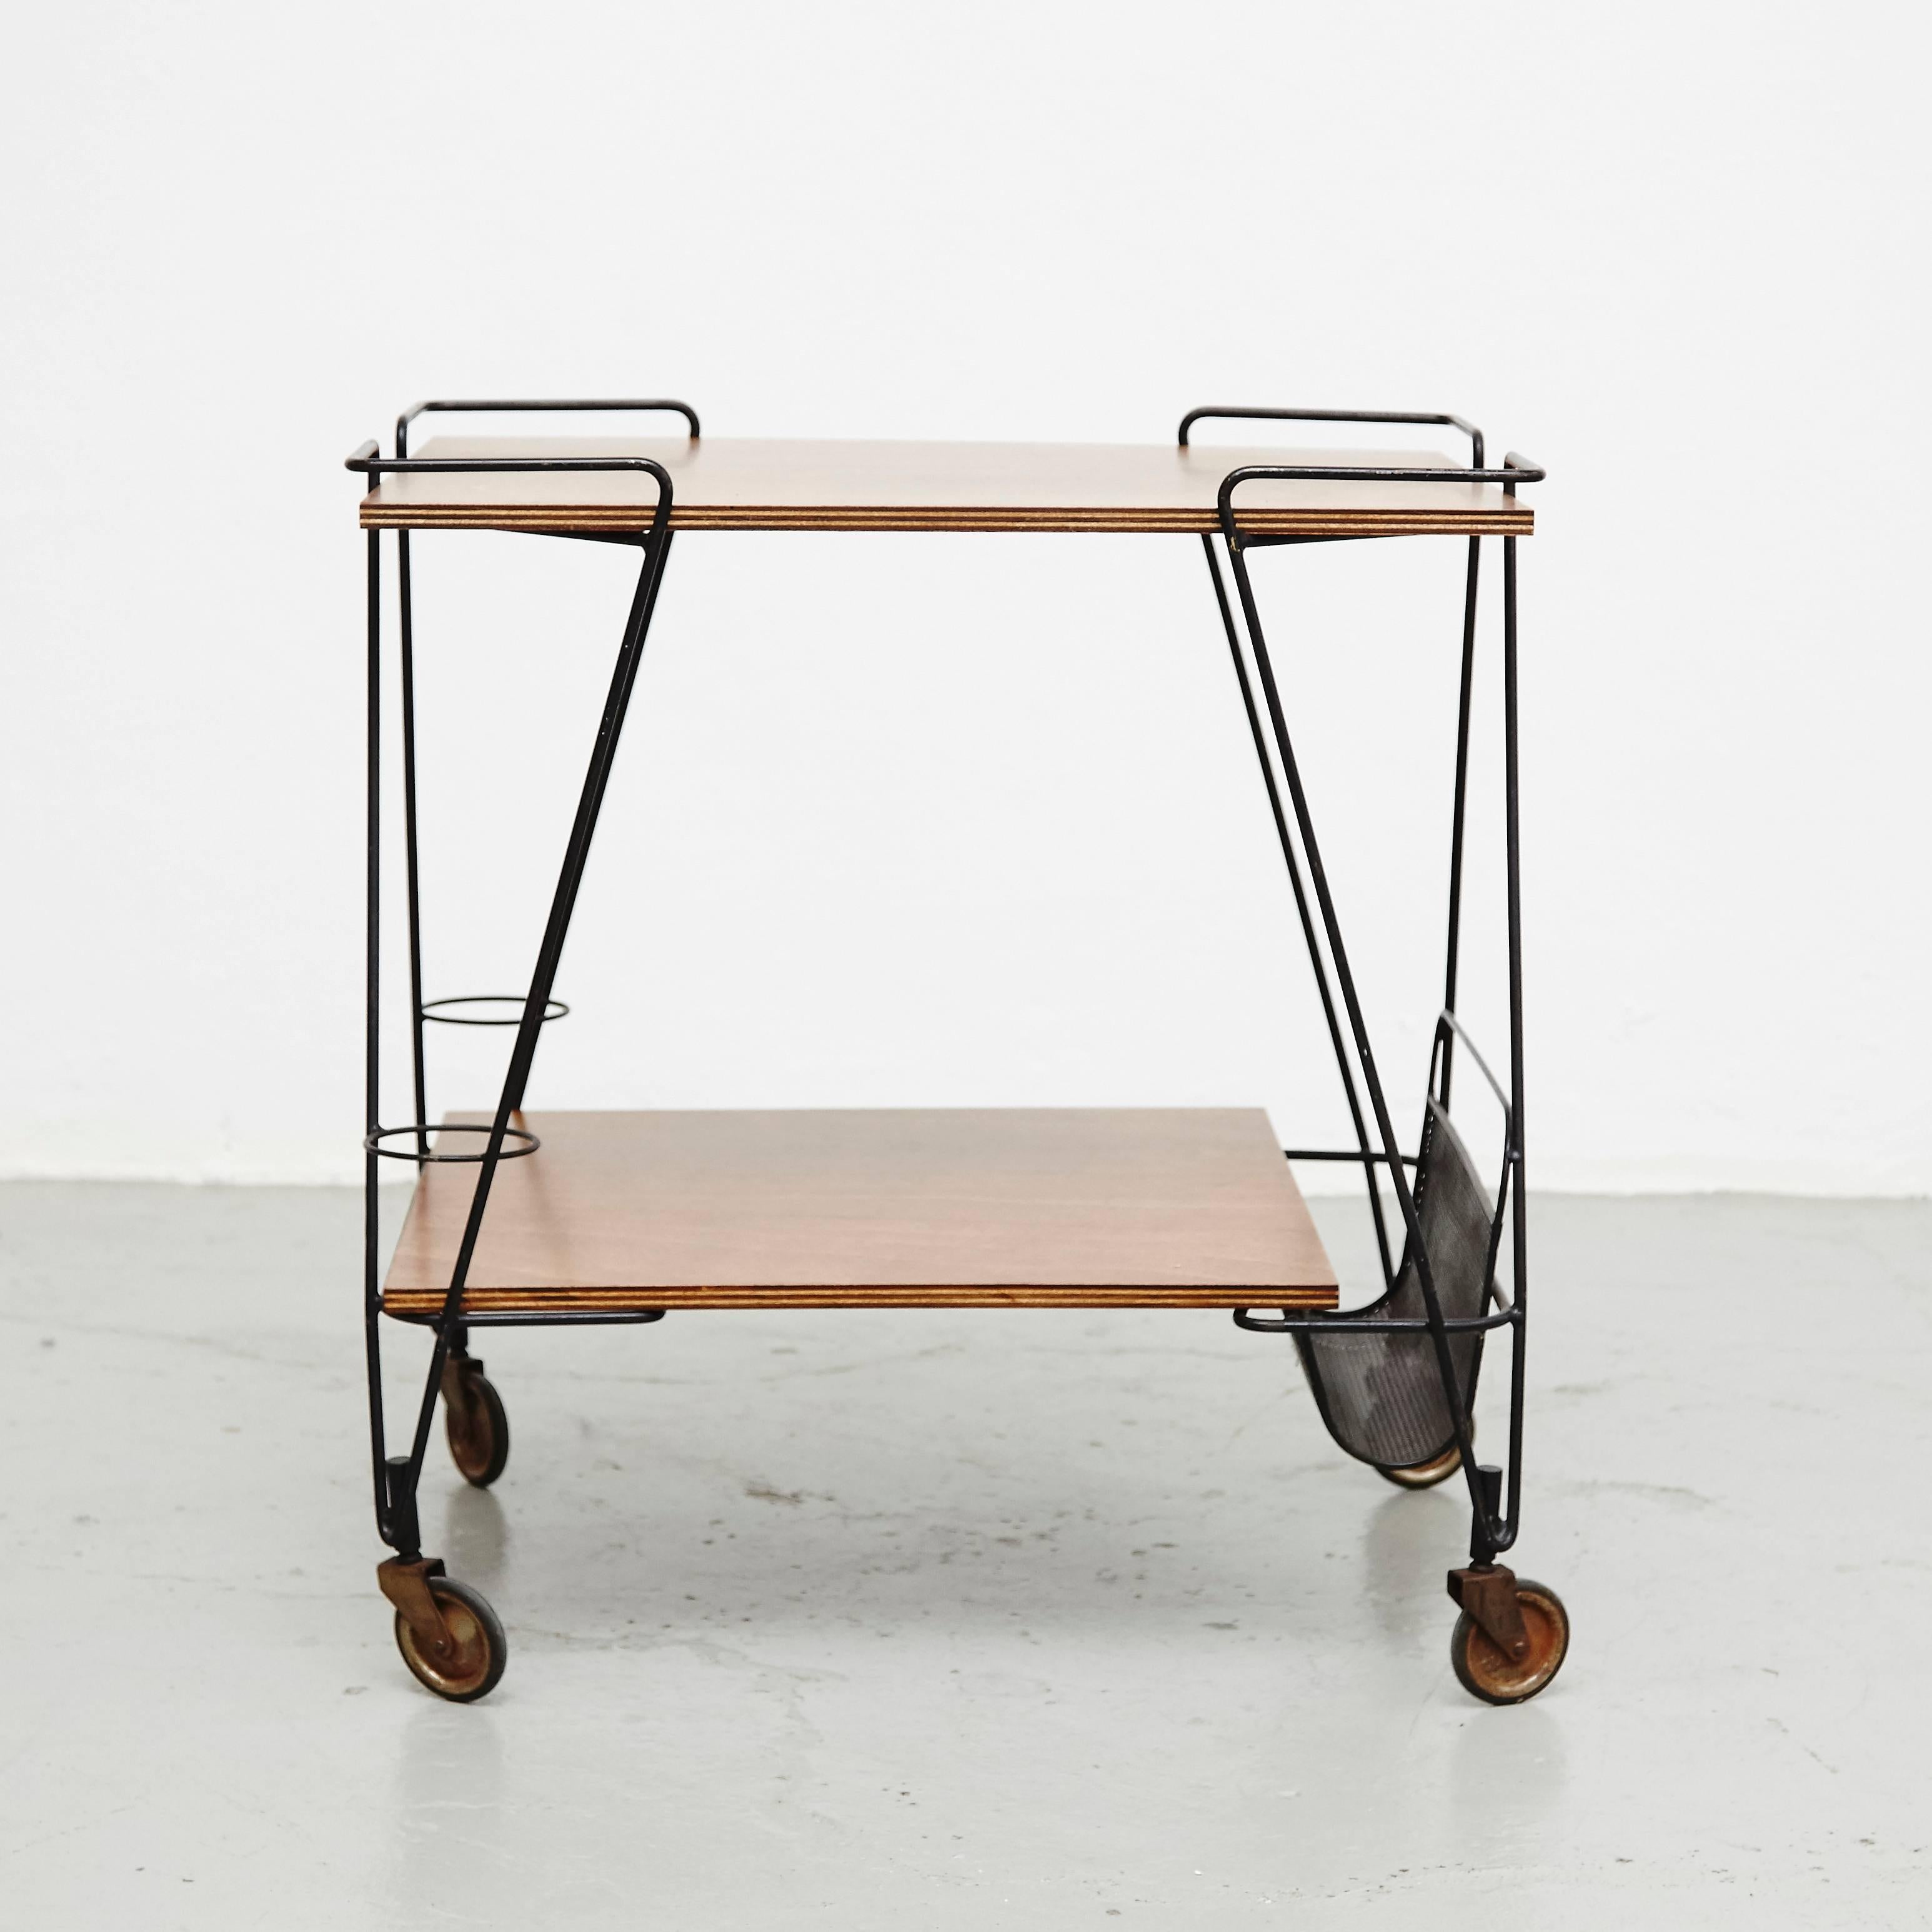 Trolley designed by Mathieu Matégot.
Manufactured by Ateliers Matégot (France), circa 1950.
Perforated metal lacquered in black and laminated wood.

In good original condition, with minor wear consistent with age and use, preserving a beautiful